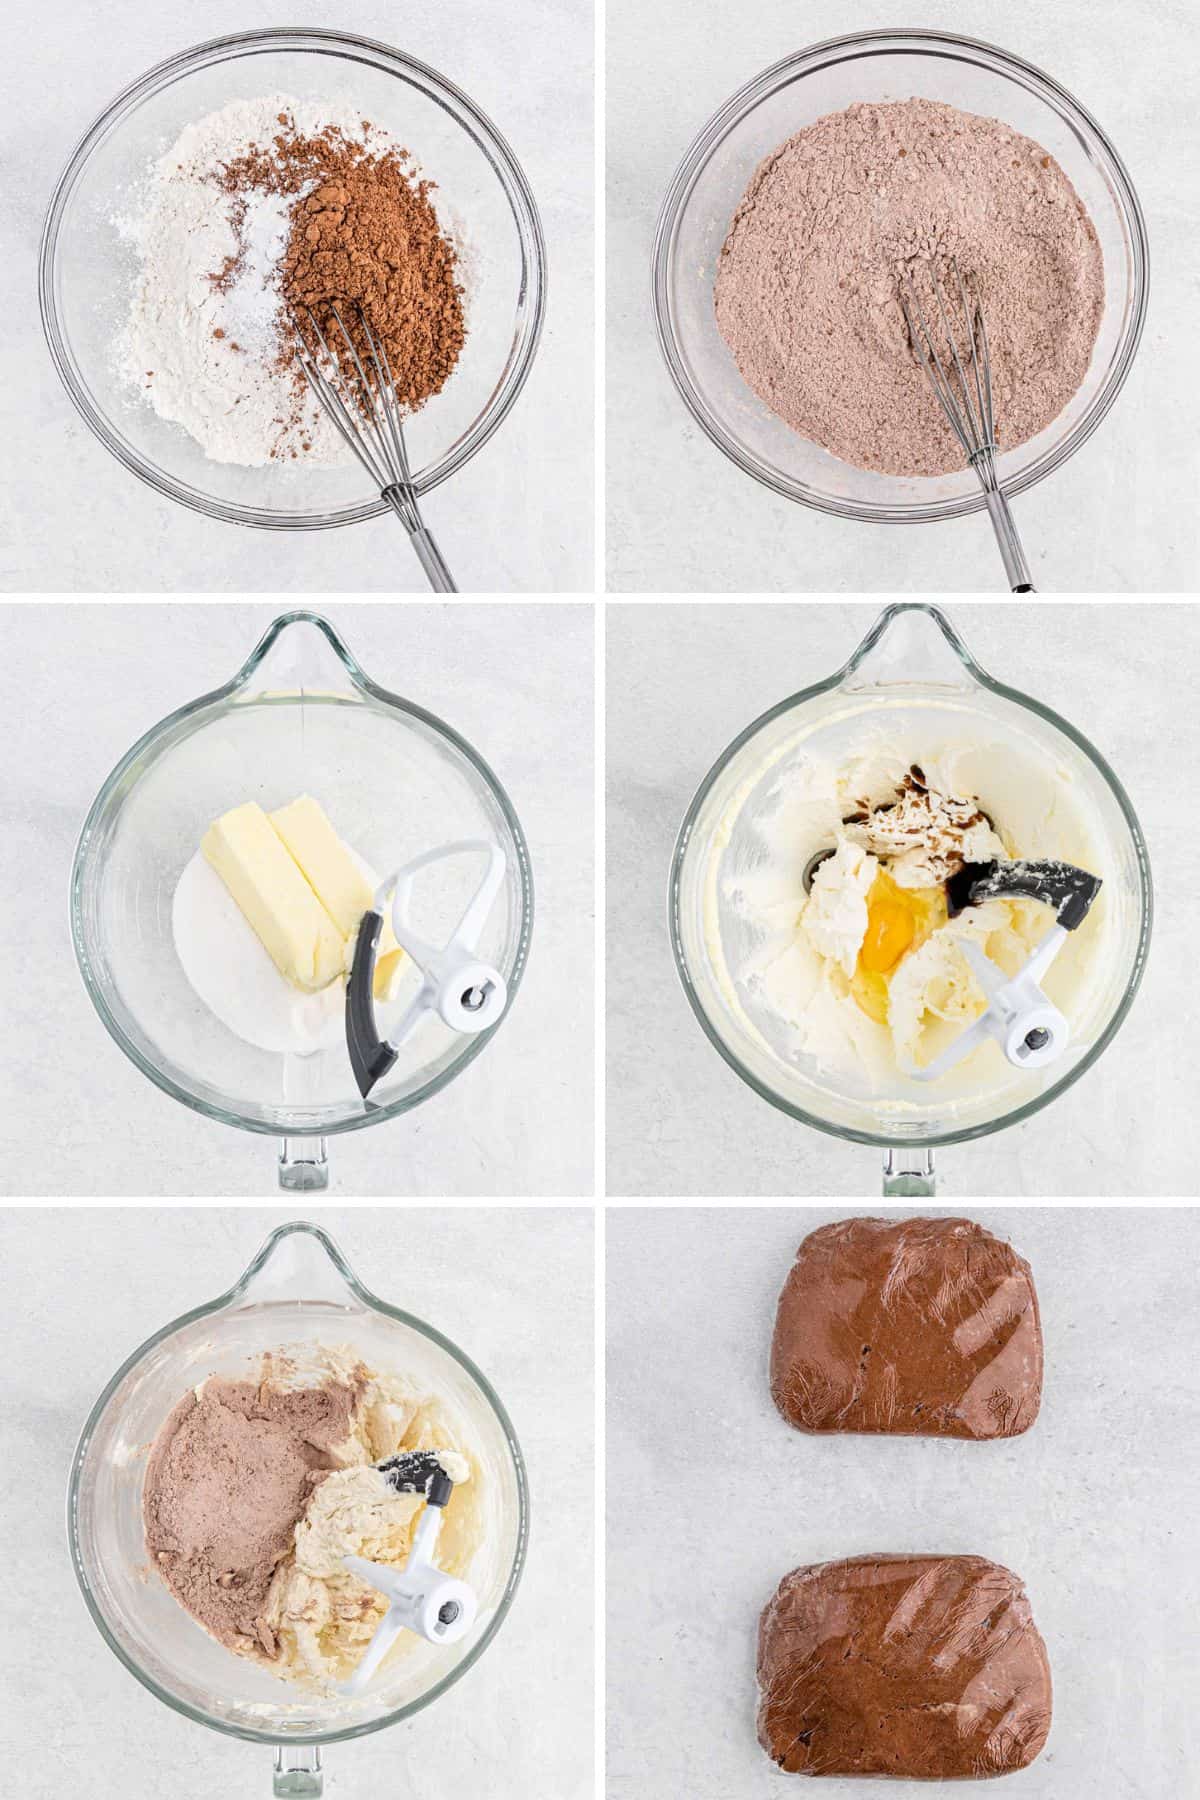 Collage of images showing the steps to make the dough for the chocolate sugar cookies